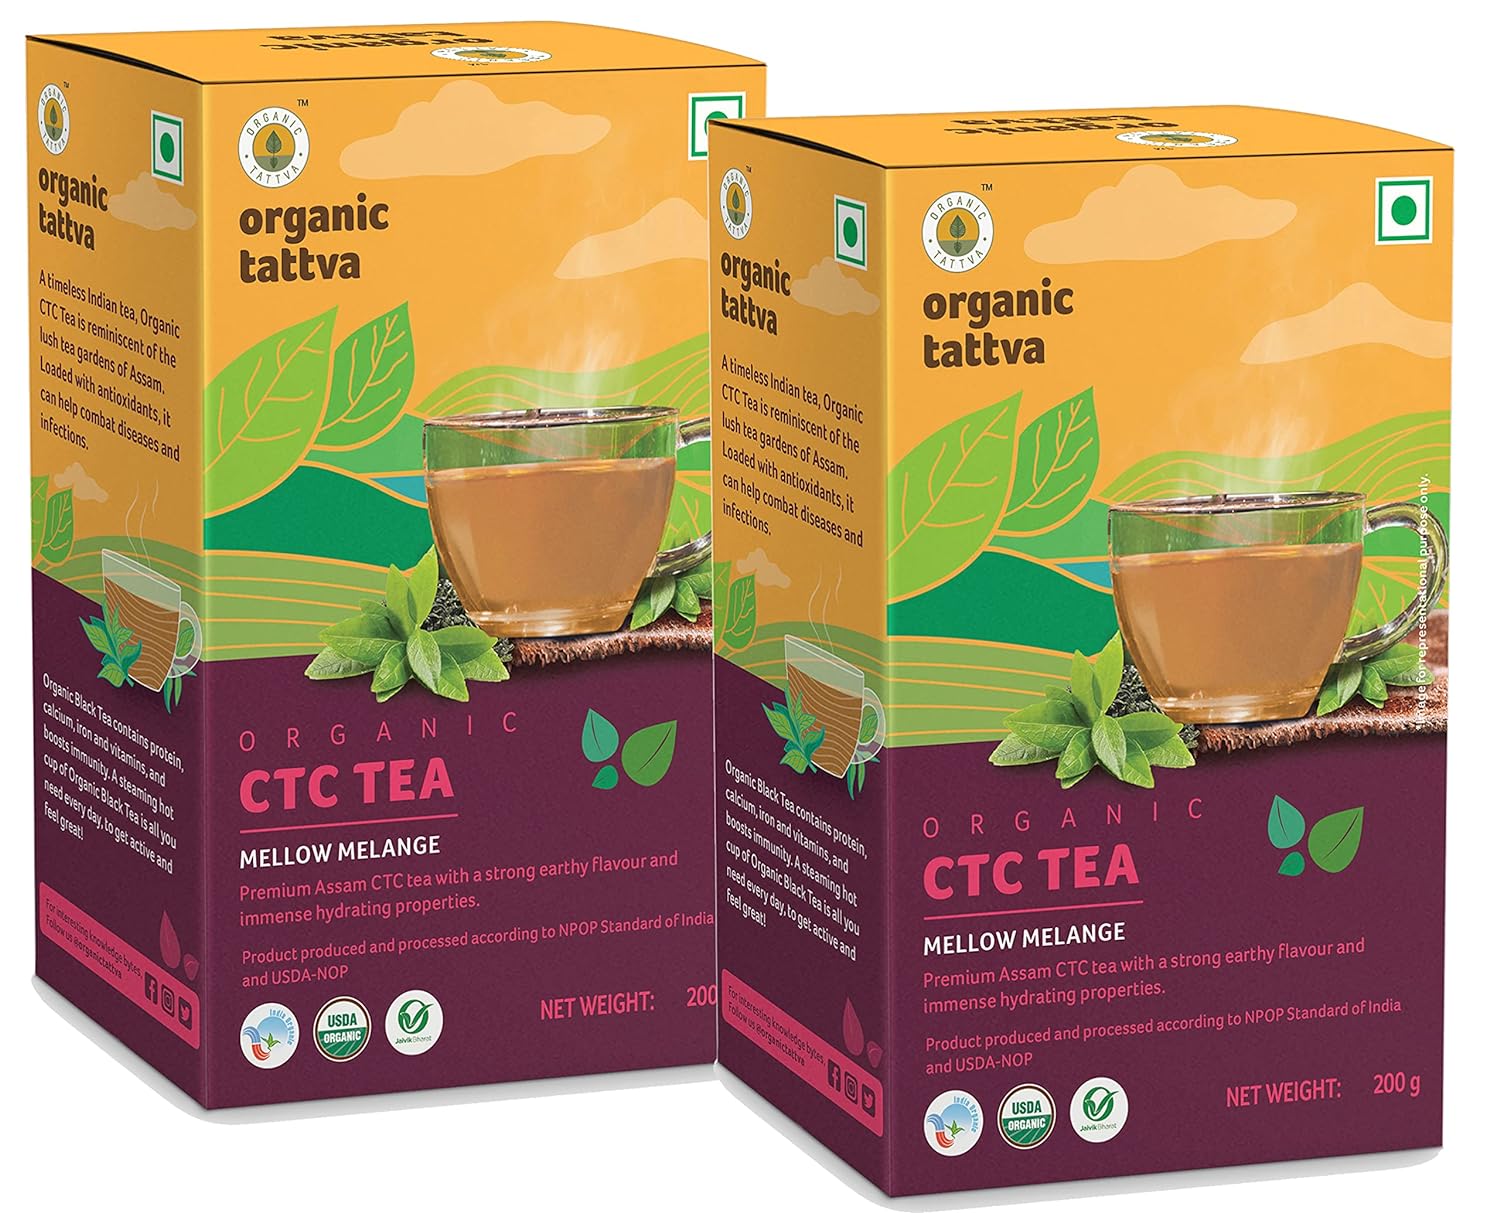 Organic Tattva Premium Assam CTC Black Tea (Chai) 400 gms| With Goodness of Protein, Calcium, Iron and Vitamins | Strong Earthy Flavour and Rich in Antioxidants | 200 gms Each